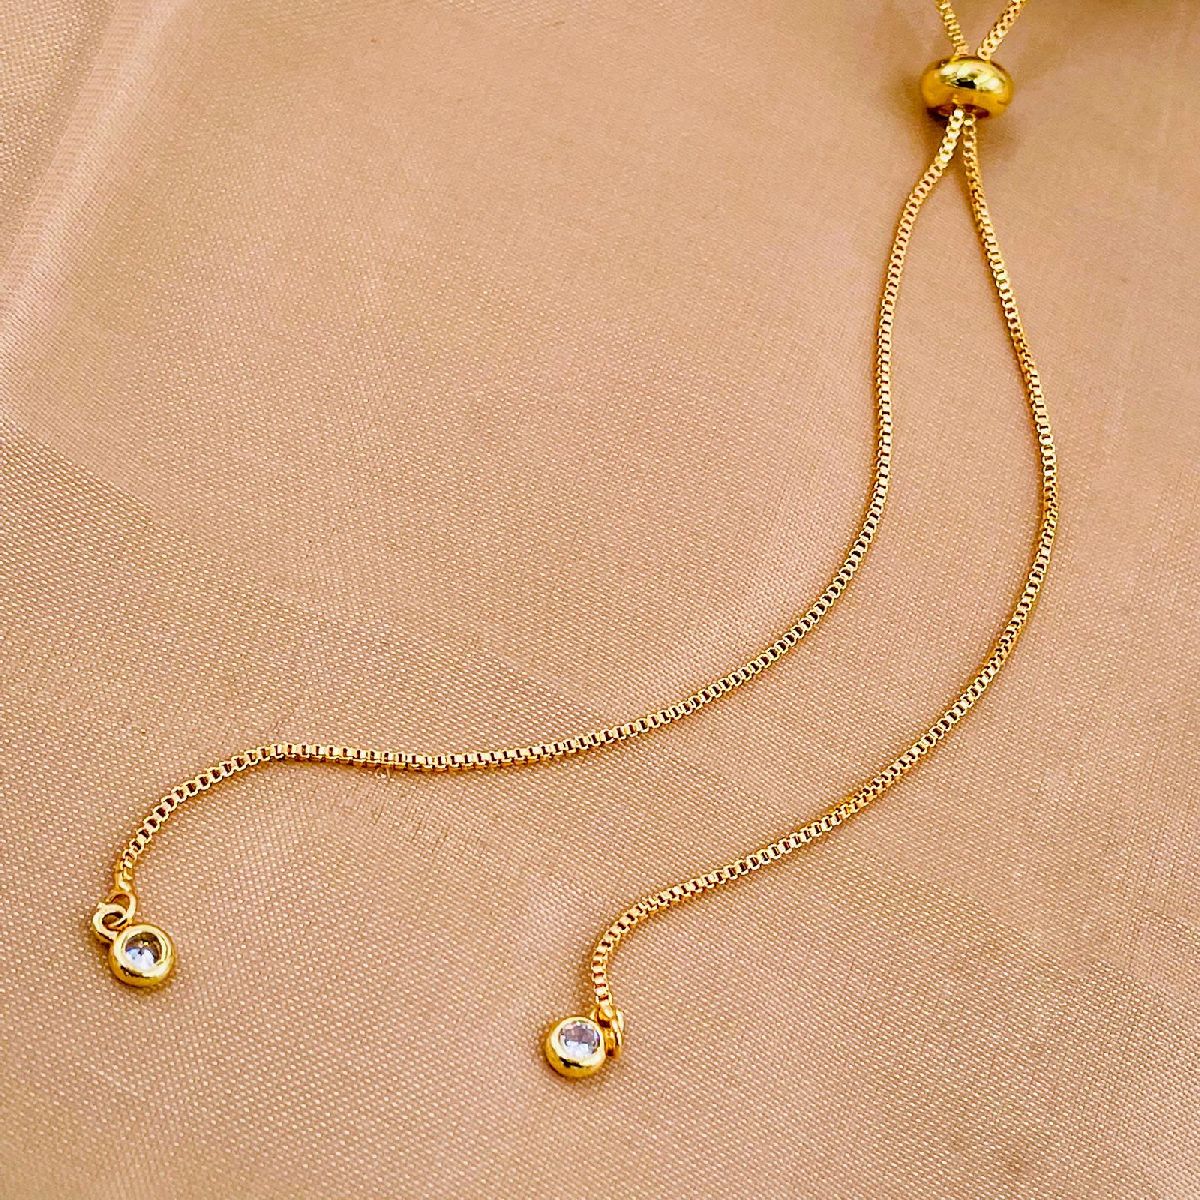 10K Gold Adjustable Length Box Chain Necklace – Van Der Hout Jewelry